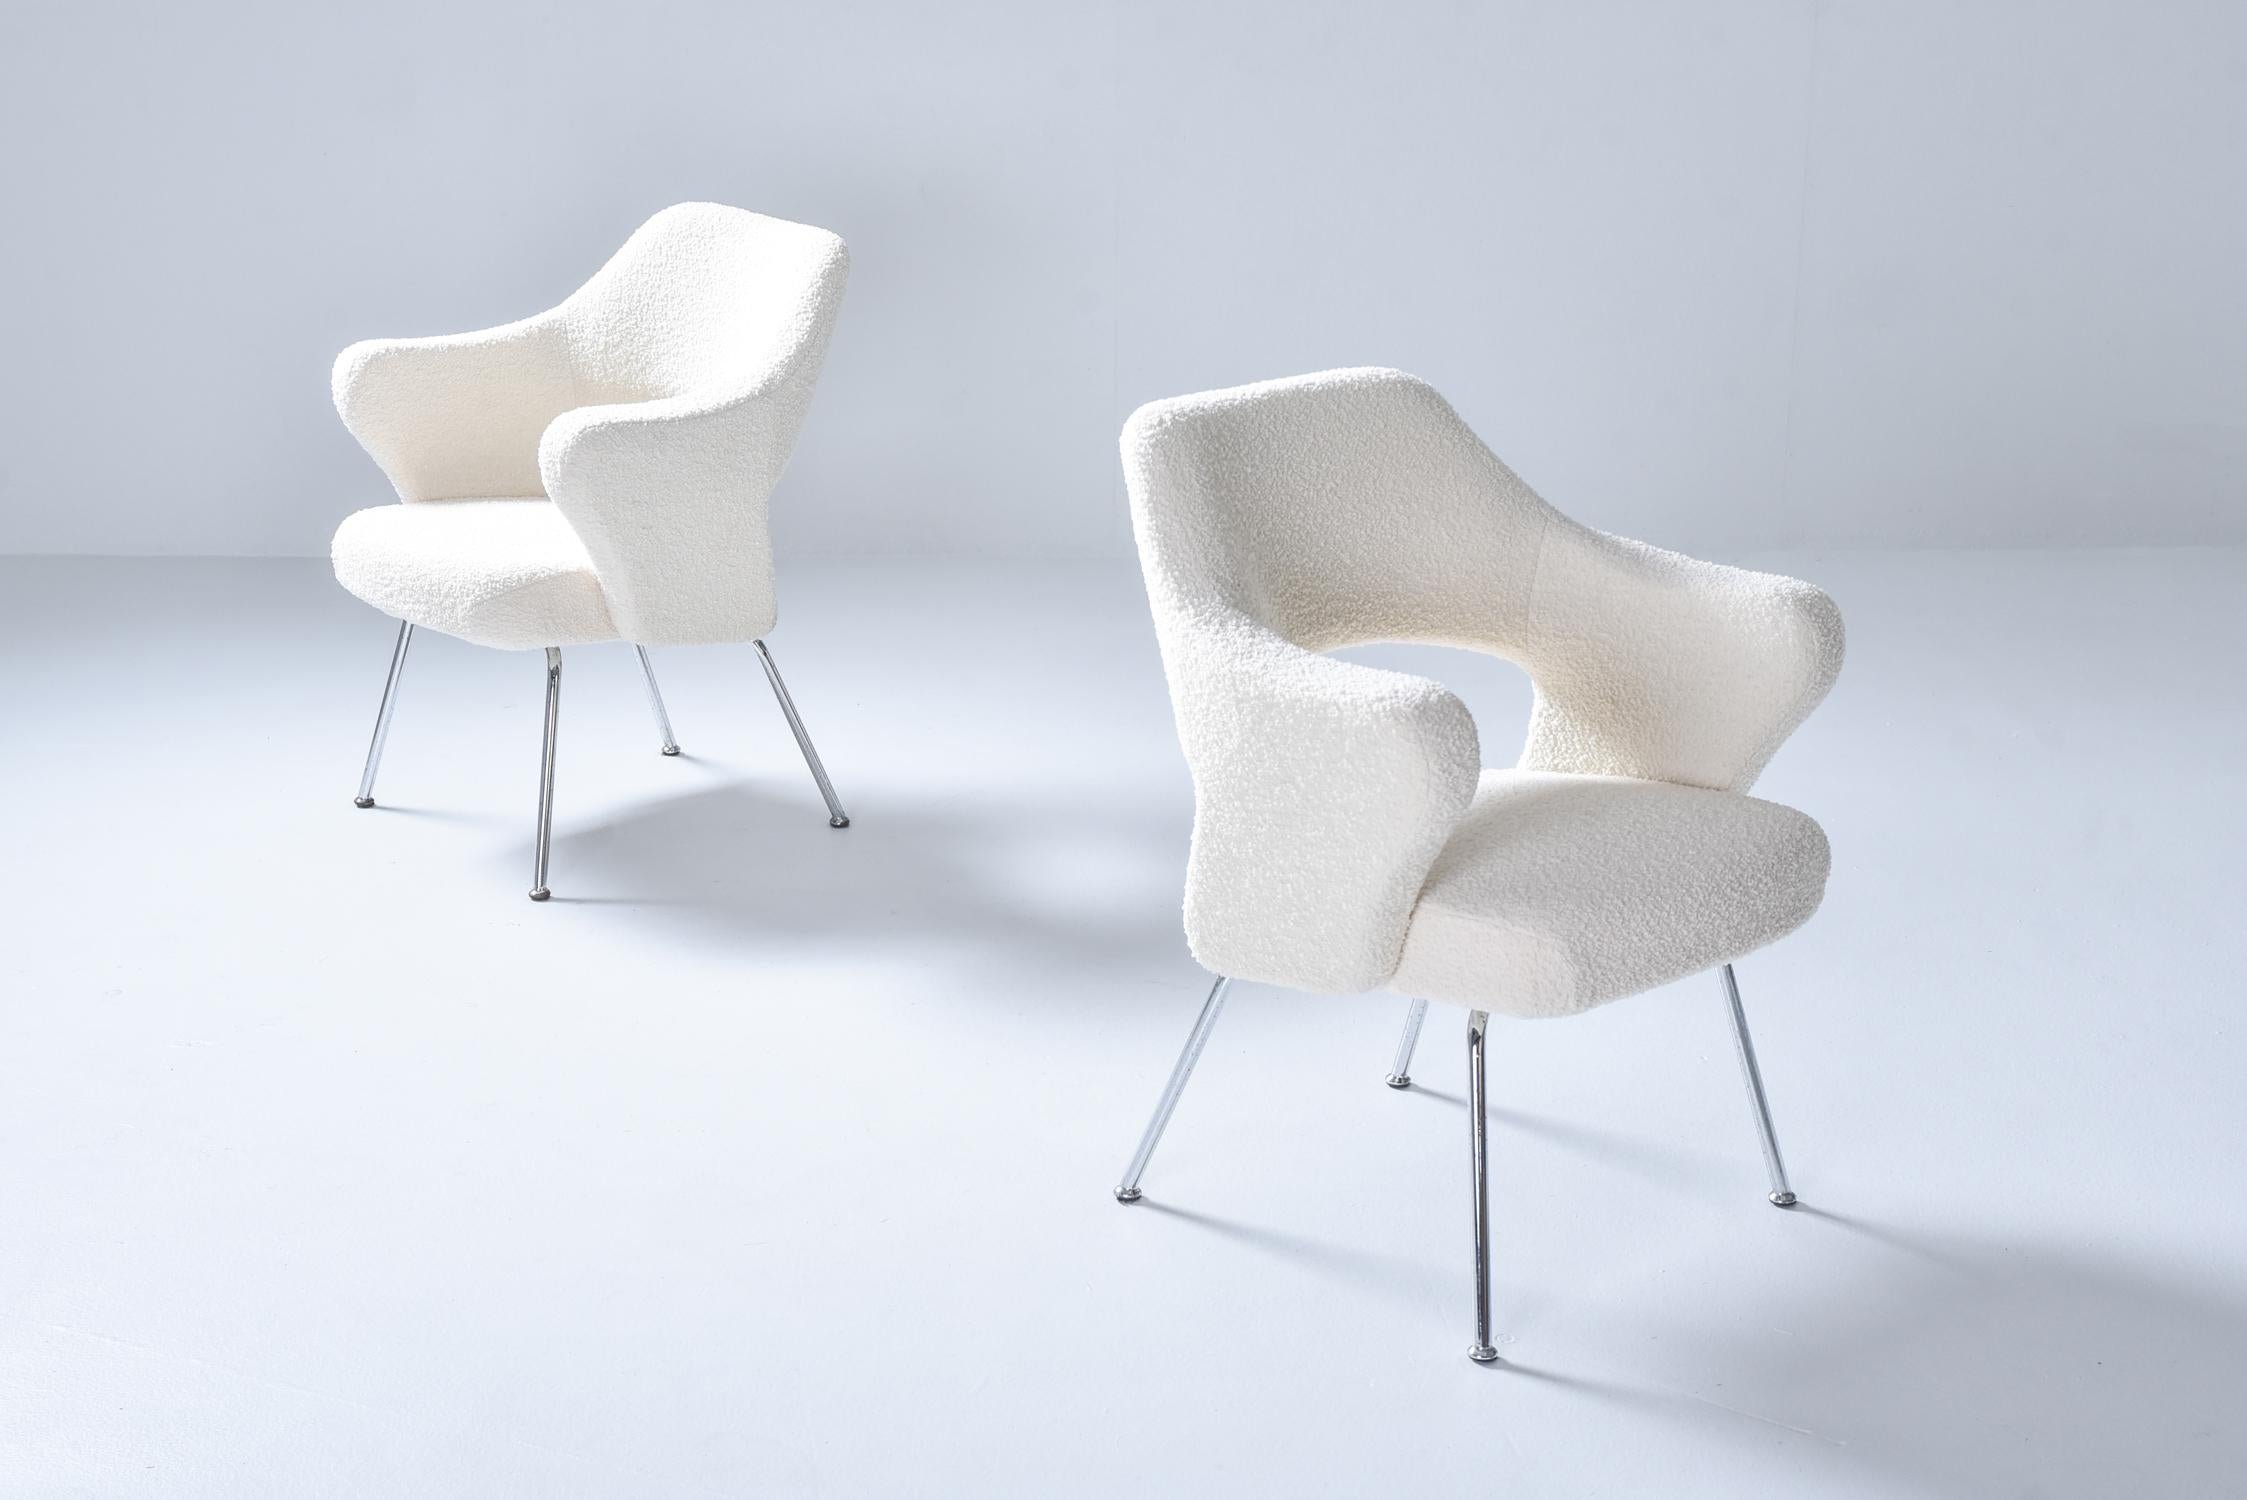 Boucle wool armchairs, P16, design Gastone Rinaldi, Rima Padova, 1950.

Postmodern Italian design armchairs by Gastone Rinaldi
His 1950s design pieces are very rare and quite sought after.
Newly upholstered in ivory white bouclé wool.

In